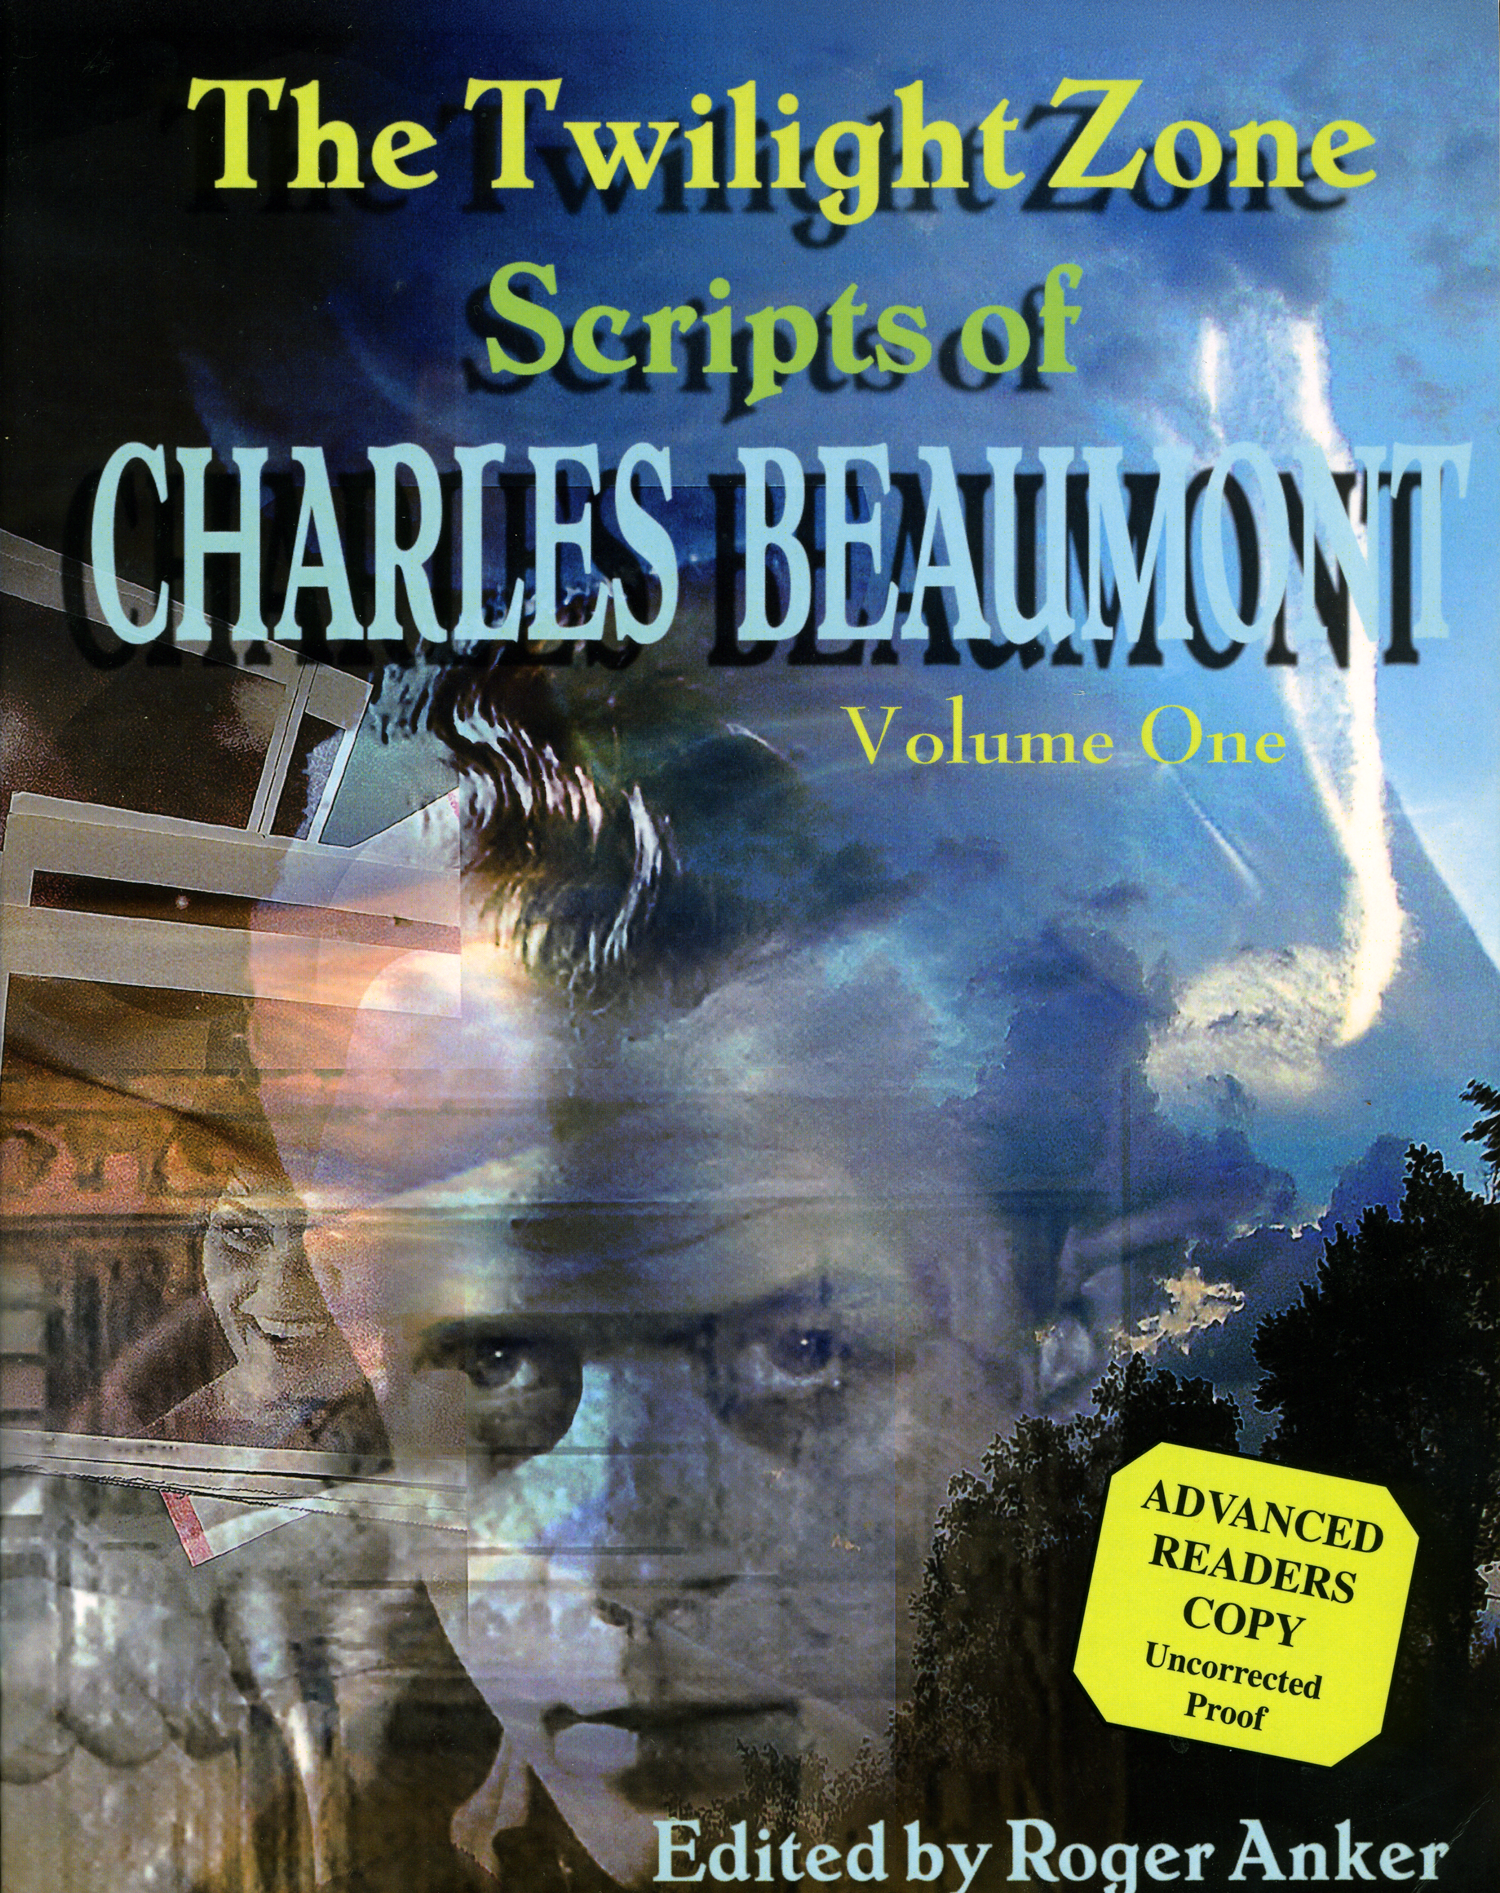 The Twilight Zone Scripts of Charles Beaumont